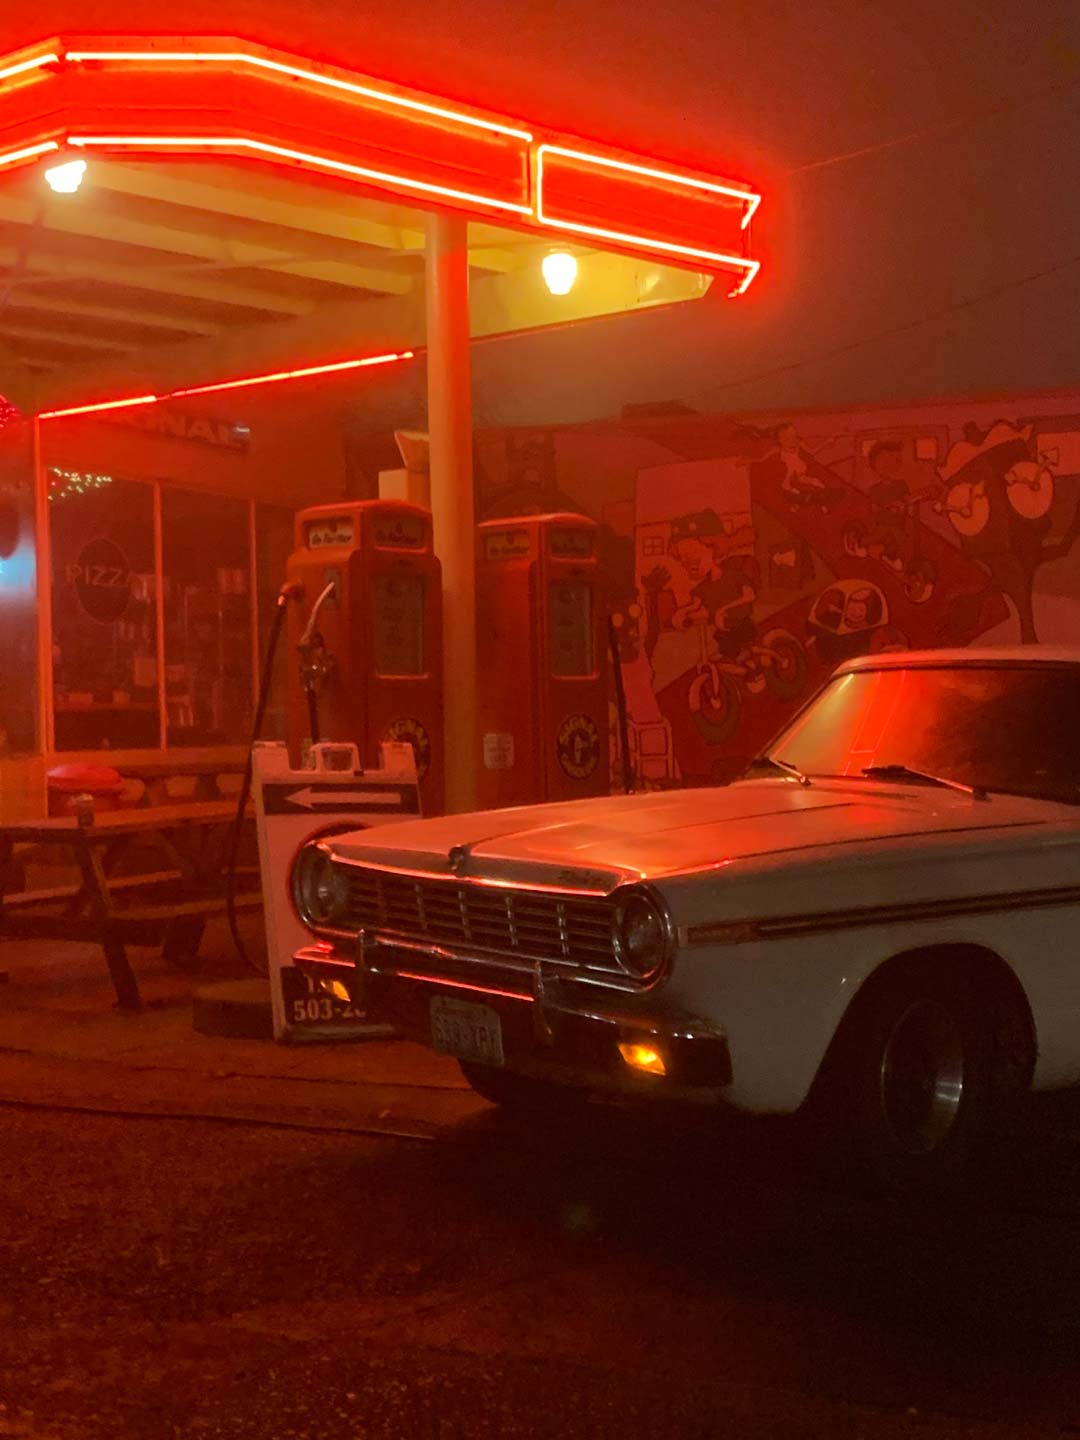 Vintage car and gas station with a red background.